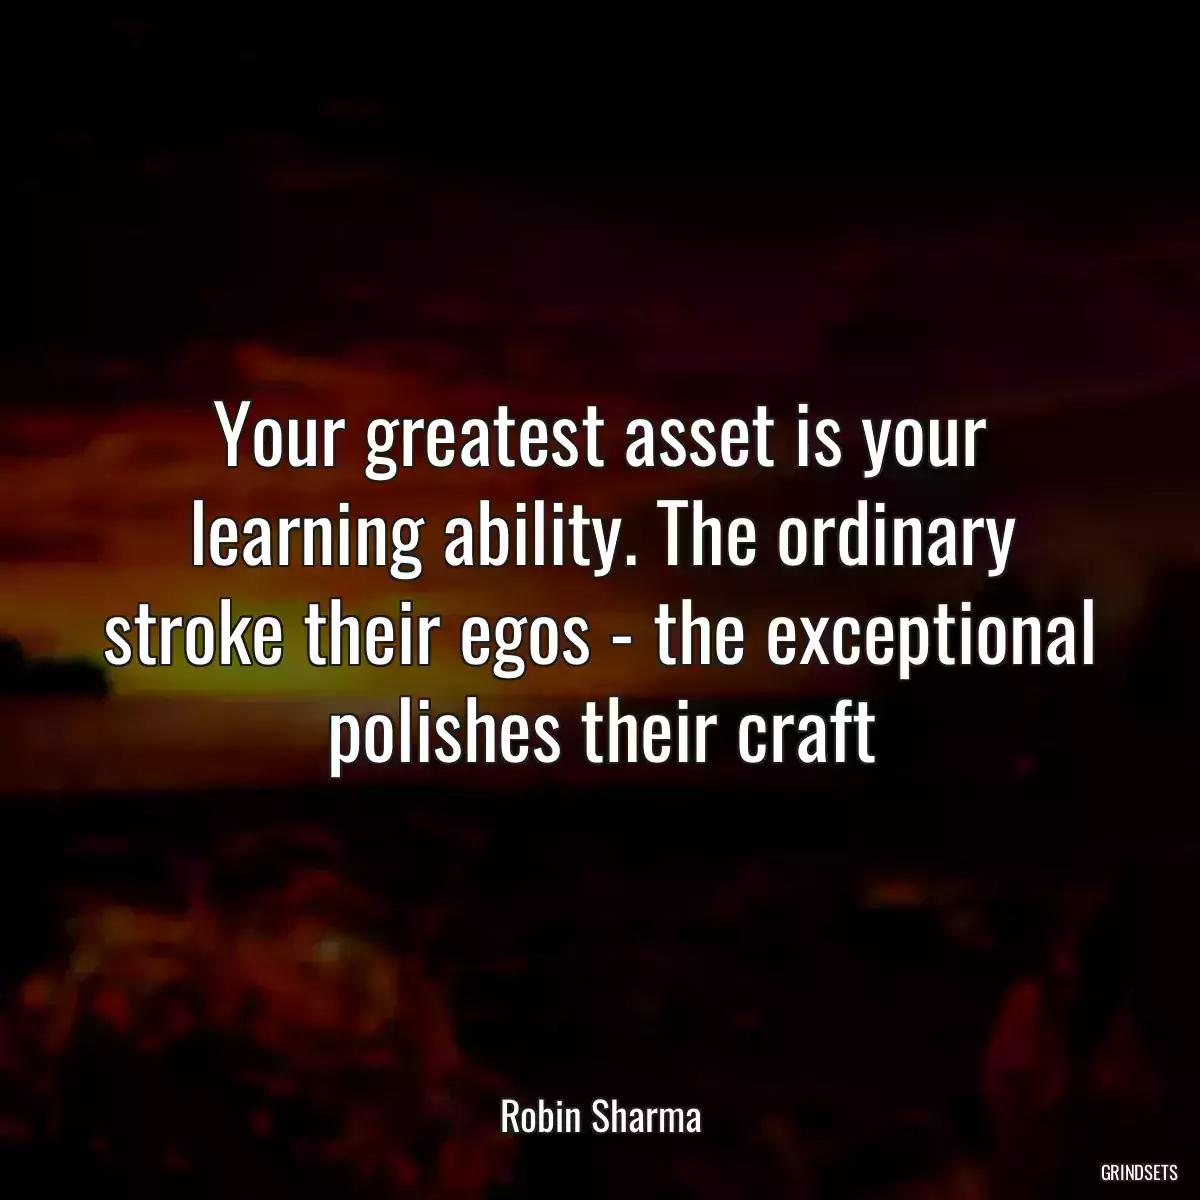 Your greatest asset is your learning ability. The ordinary stroke their egos - the exceptional polishes their craft